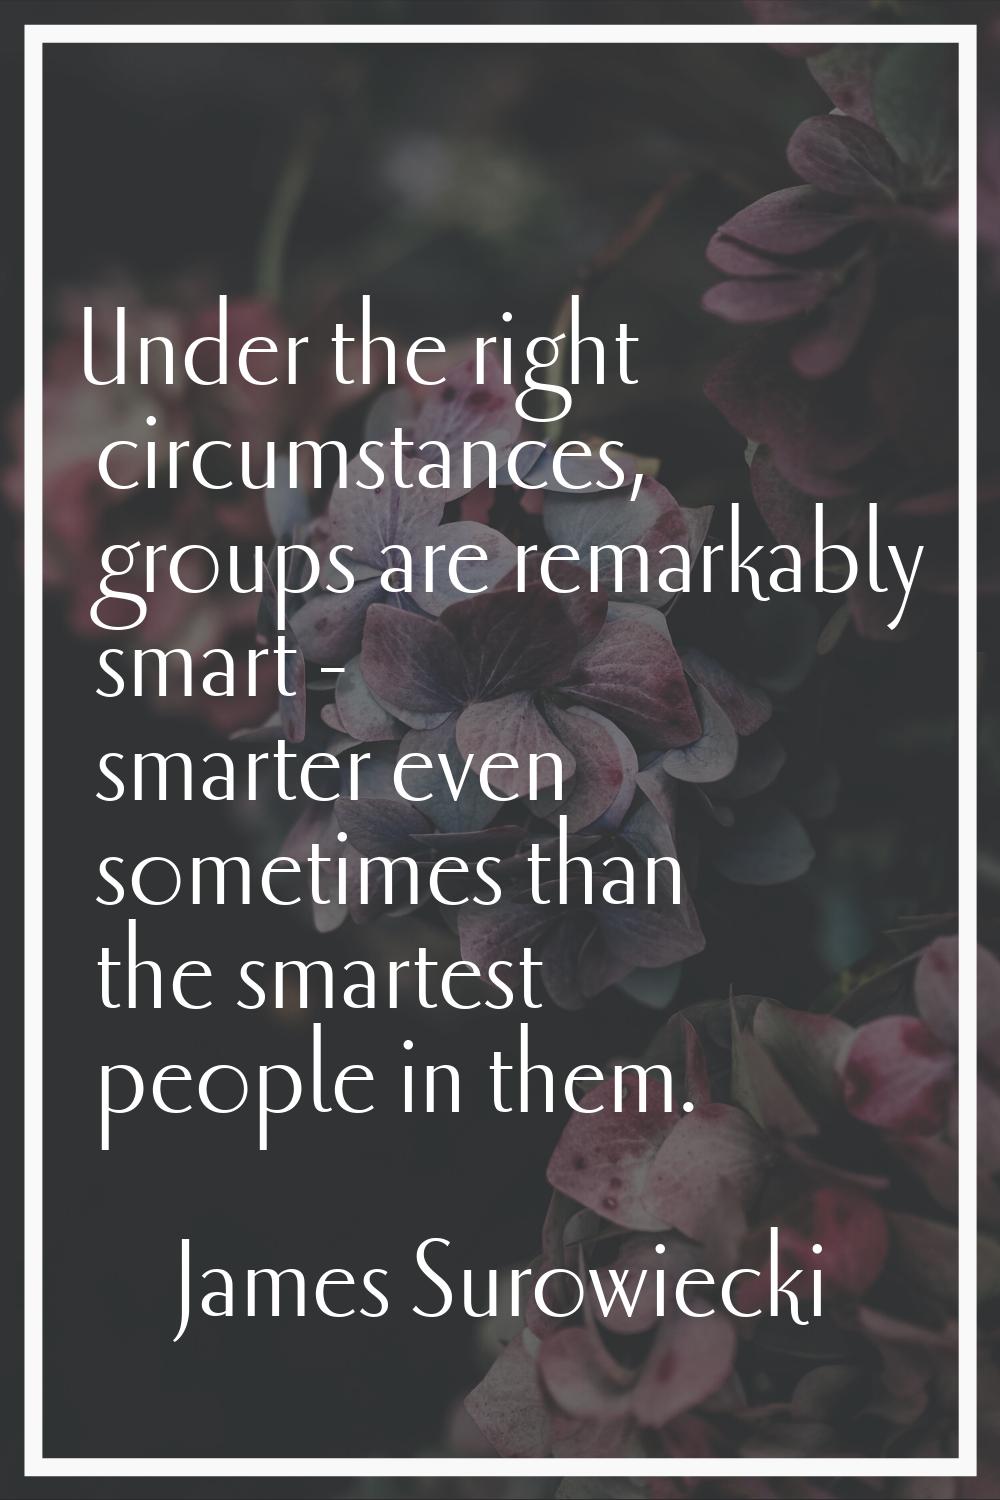 Under the right circumstances, groups are remarkably smart - smarter even sometimes than the smarte